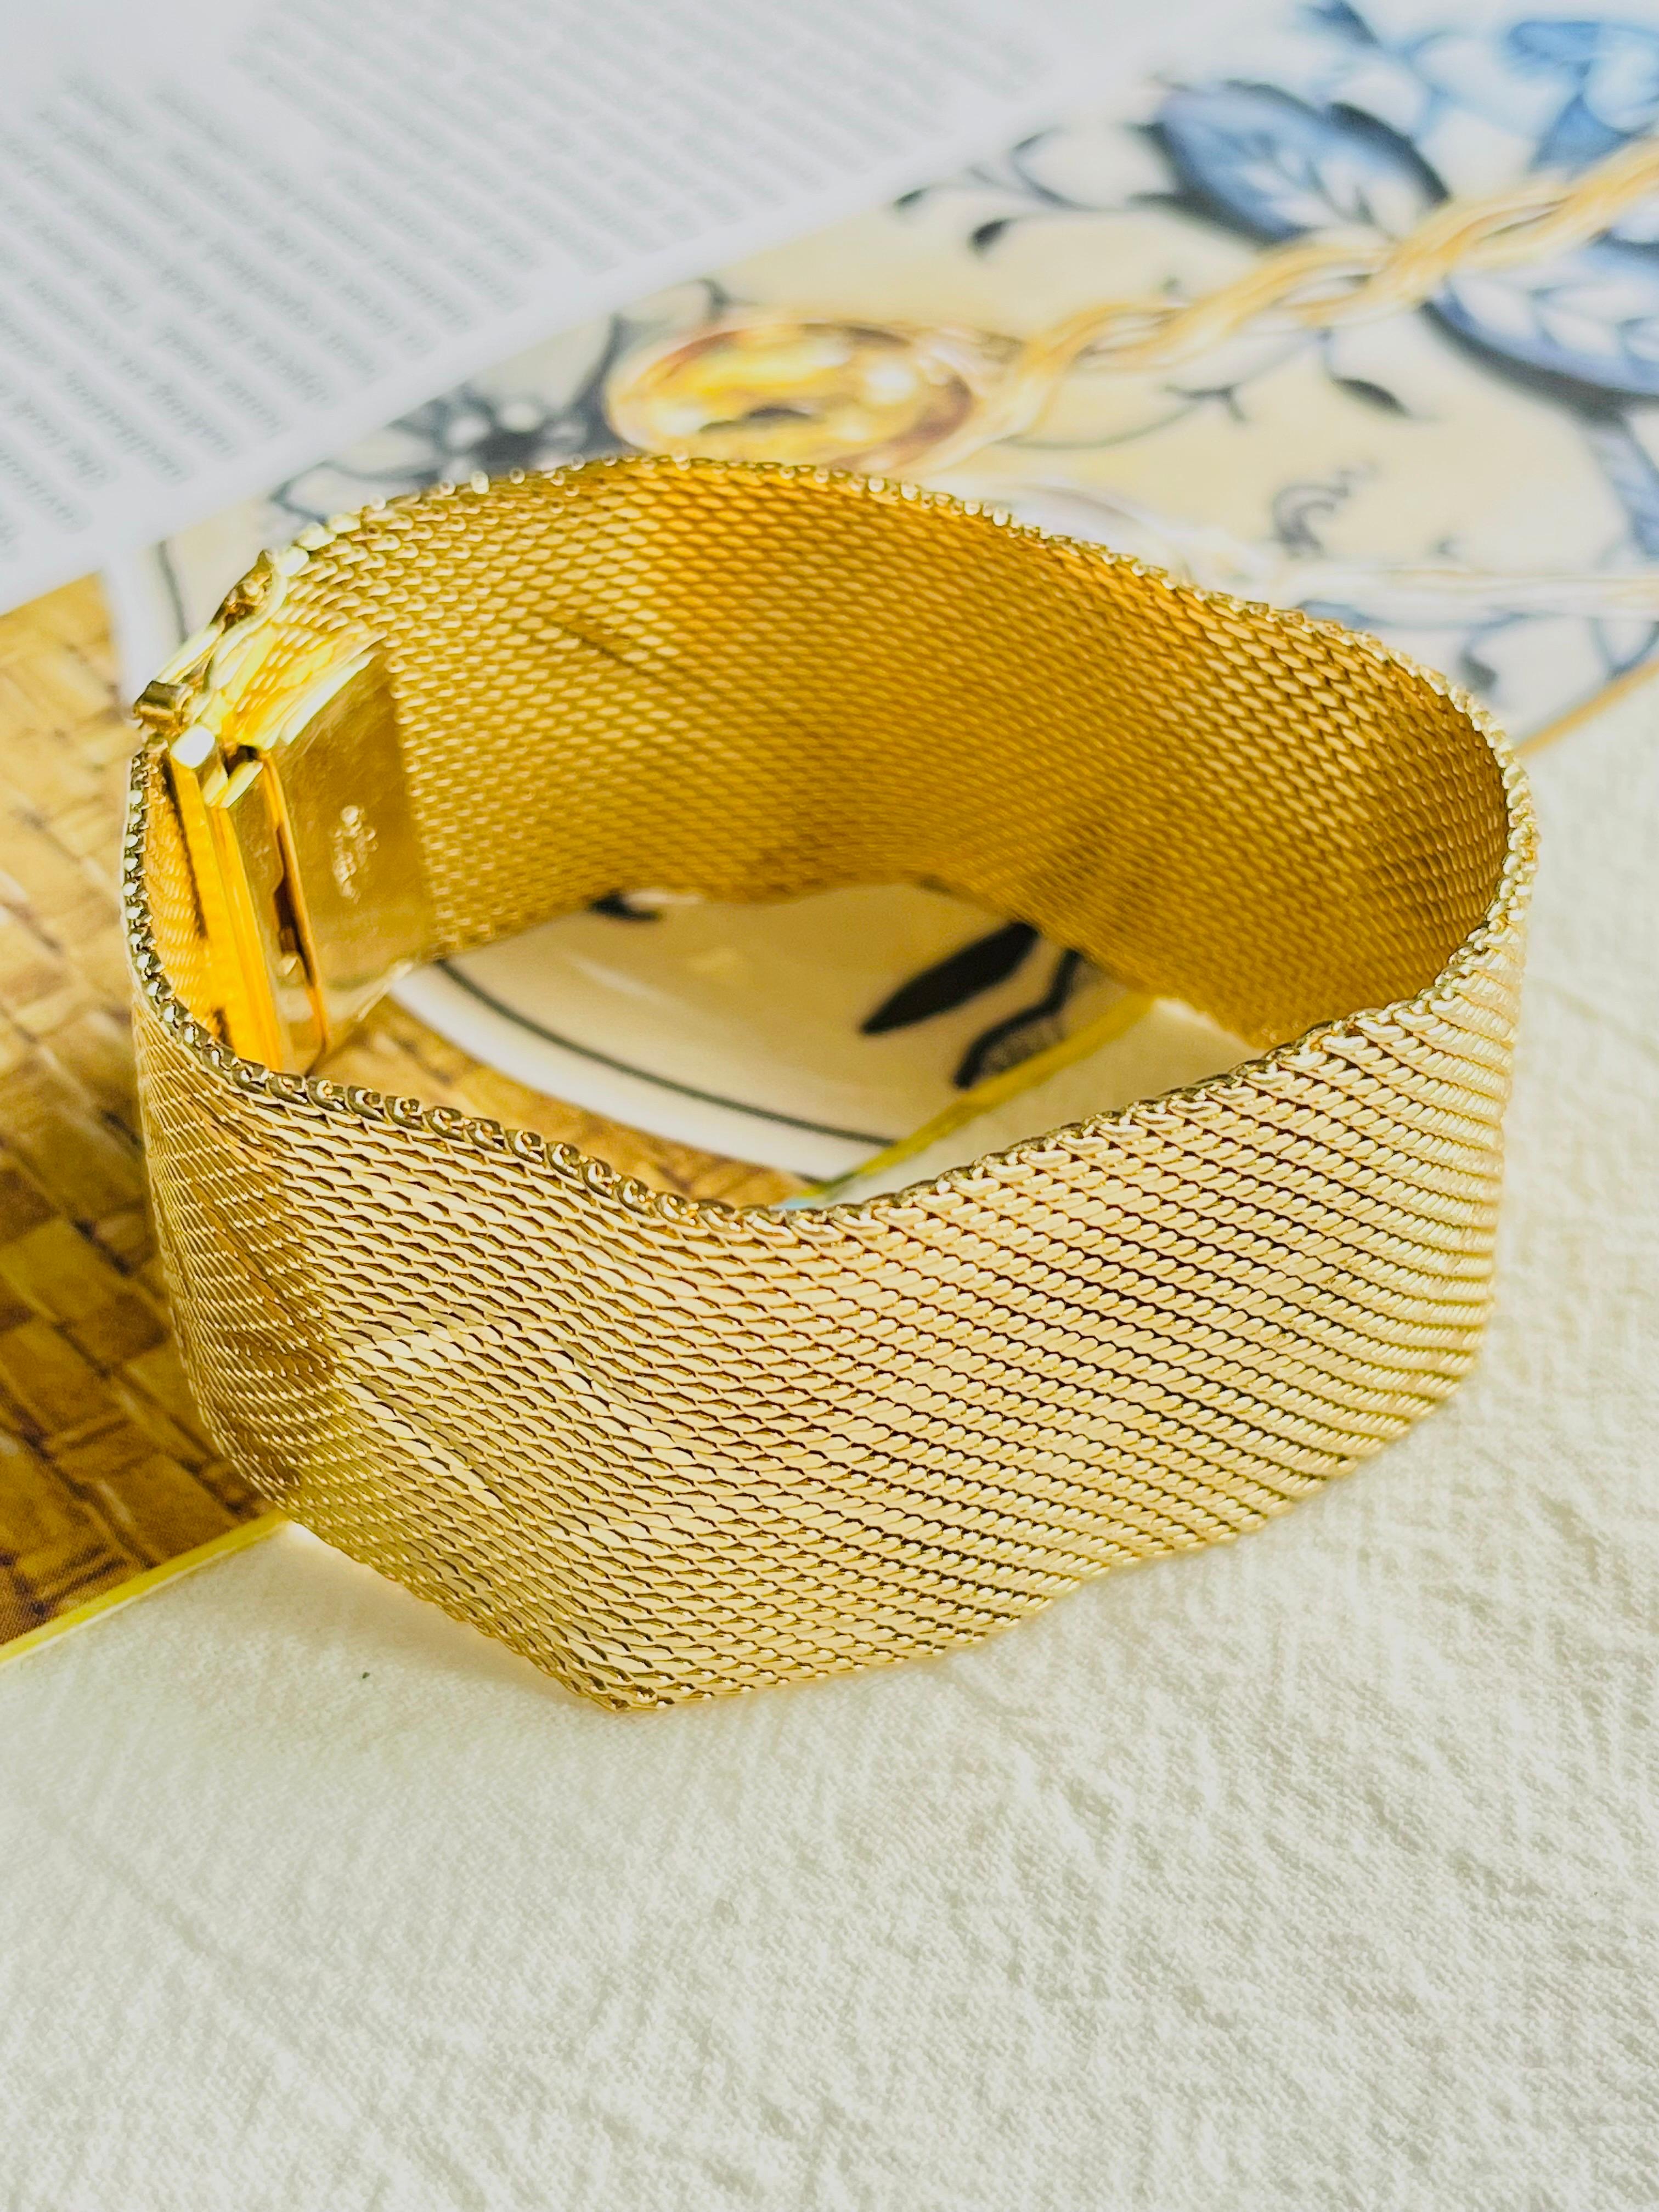 Christian Dior GROSSE 1966 Unisex Cross Diamond Woven Mesh Modernist Statement Cuff Bracelet, Gold Tone

A very beautiful bracelet by Chr. DIOR GROSSE, signed at the back.

Very good condition. Not very paralleled since the bracelet was made almost